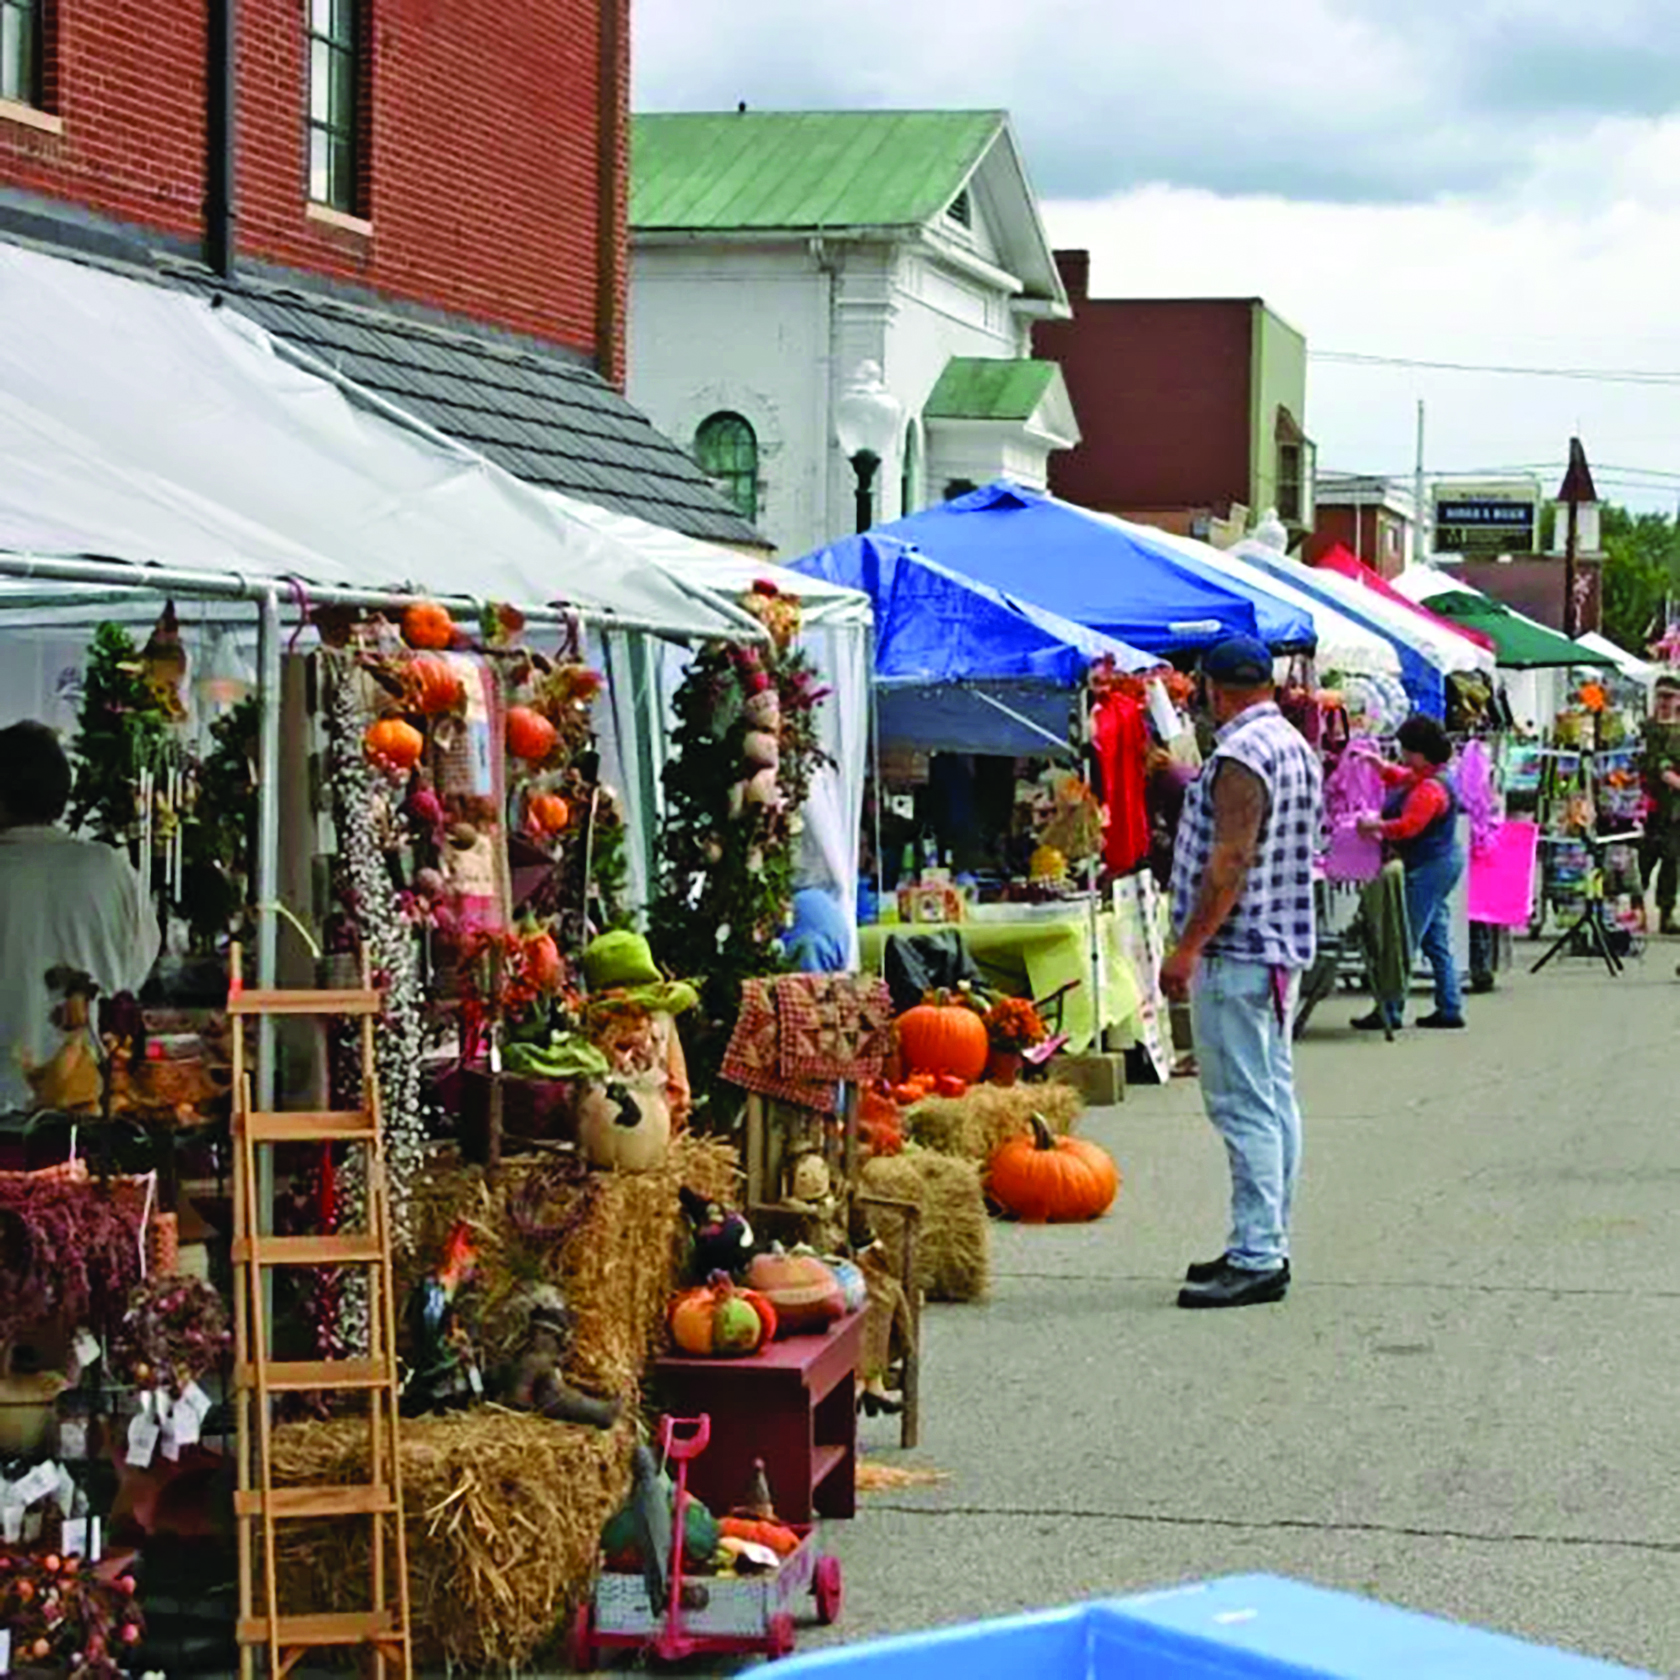 Greenup County’s 57th Old Fashioned Days Next Weekend